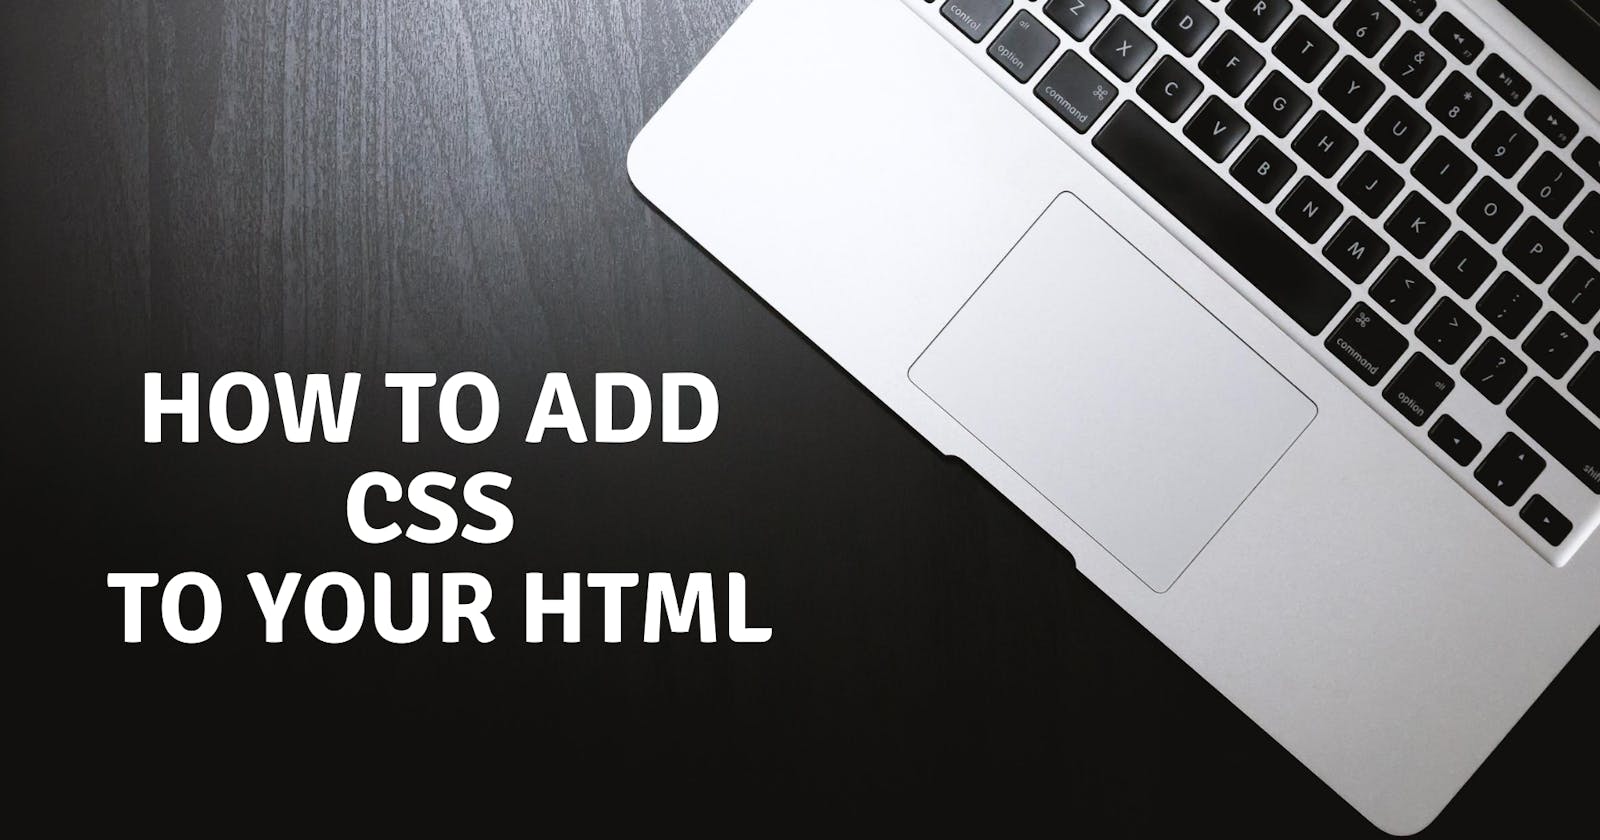 Different ways You can apply CSS to your HTML